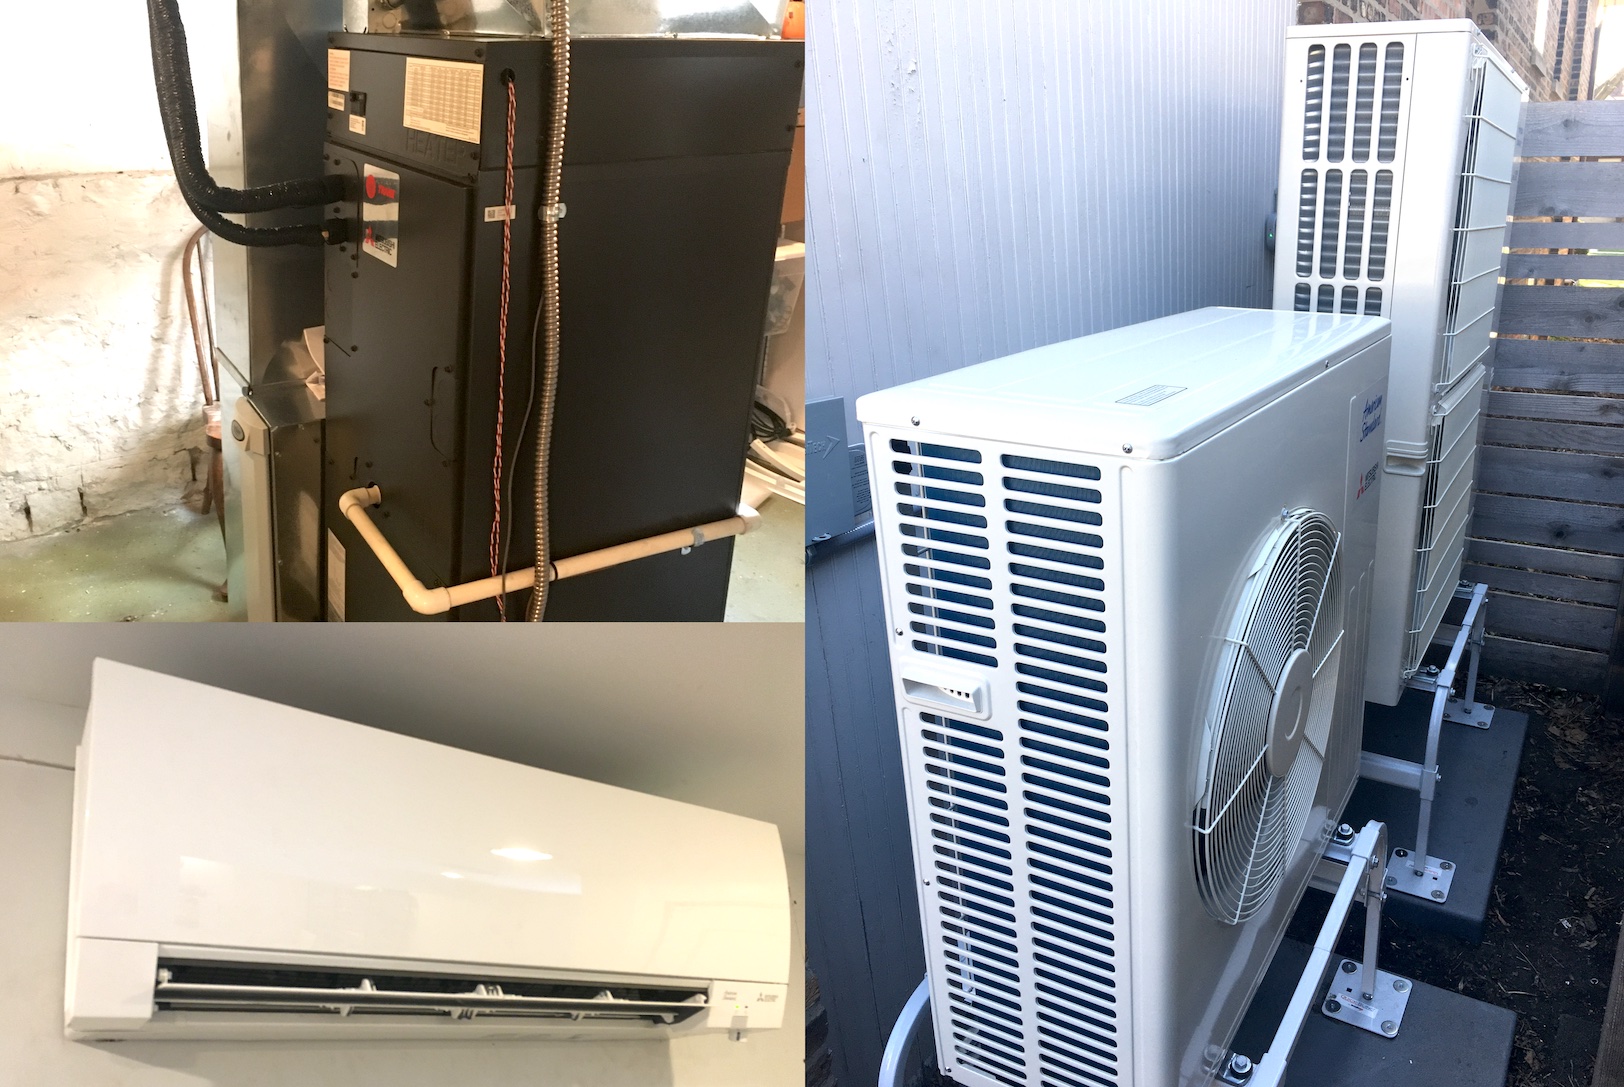 Our heat pumps and condensers